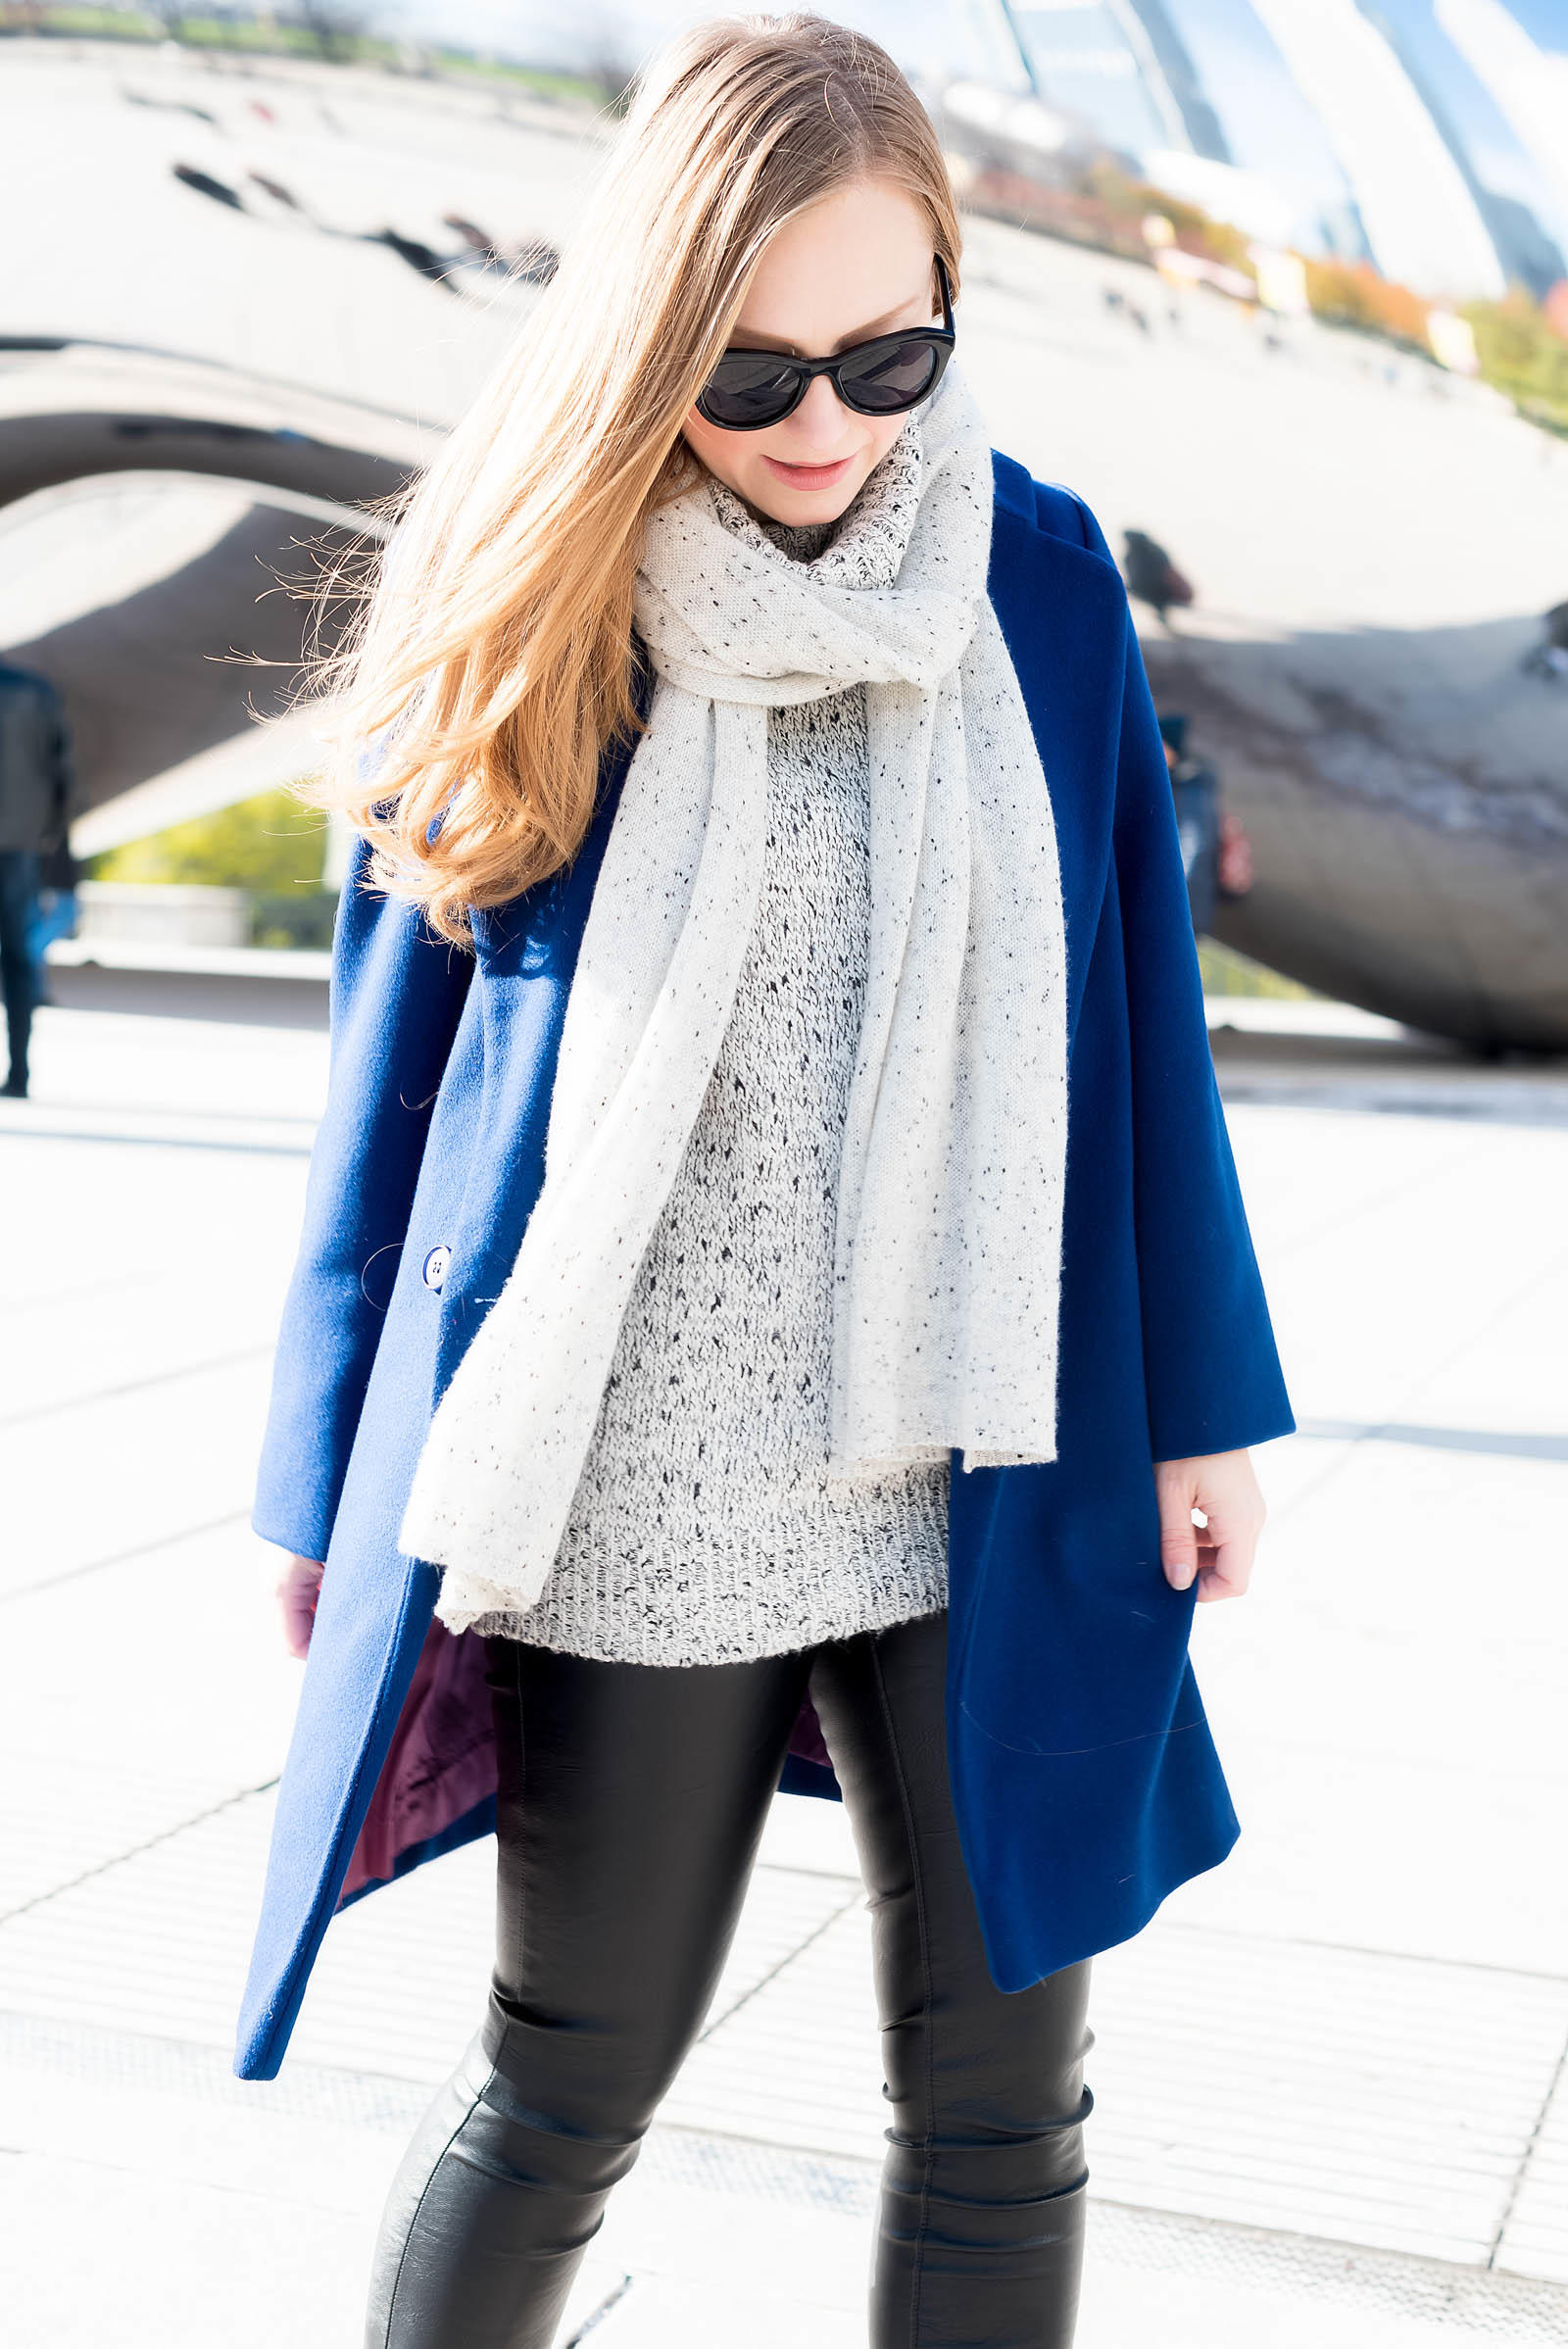 Chic Winter Sightseeing Outfit Cobalt Leopard